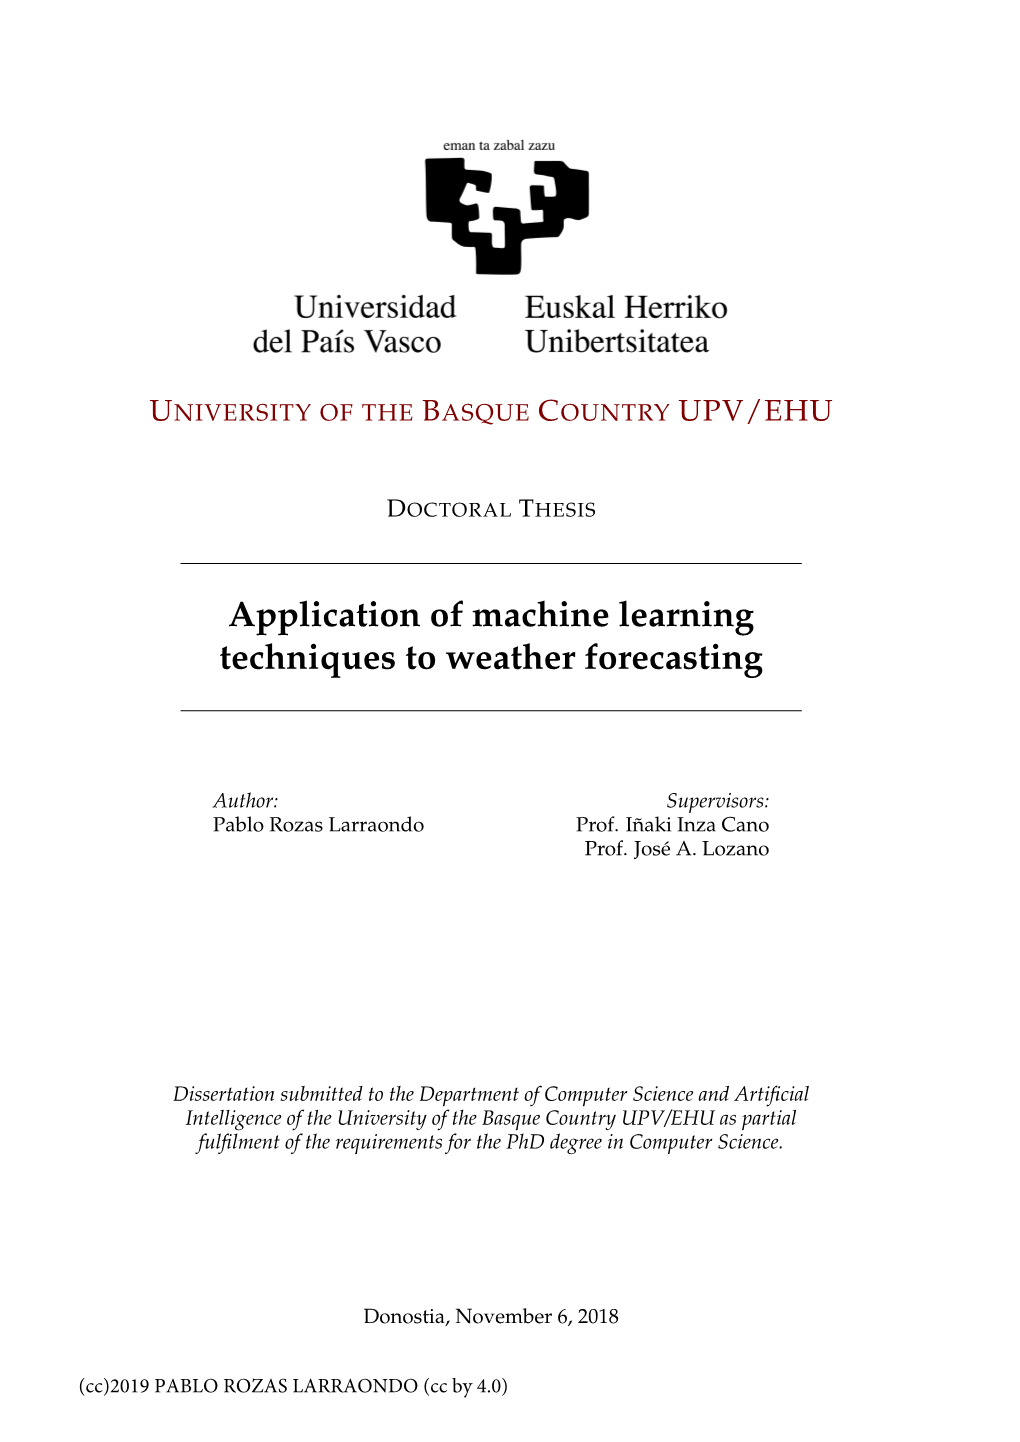 Application of Machine Learning Techniques to Weather Forecasting